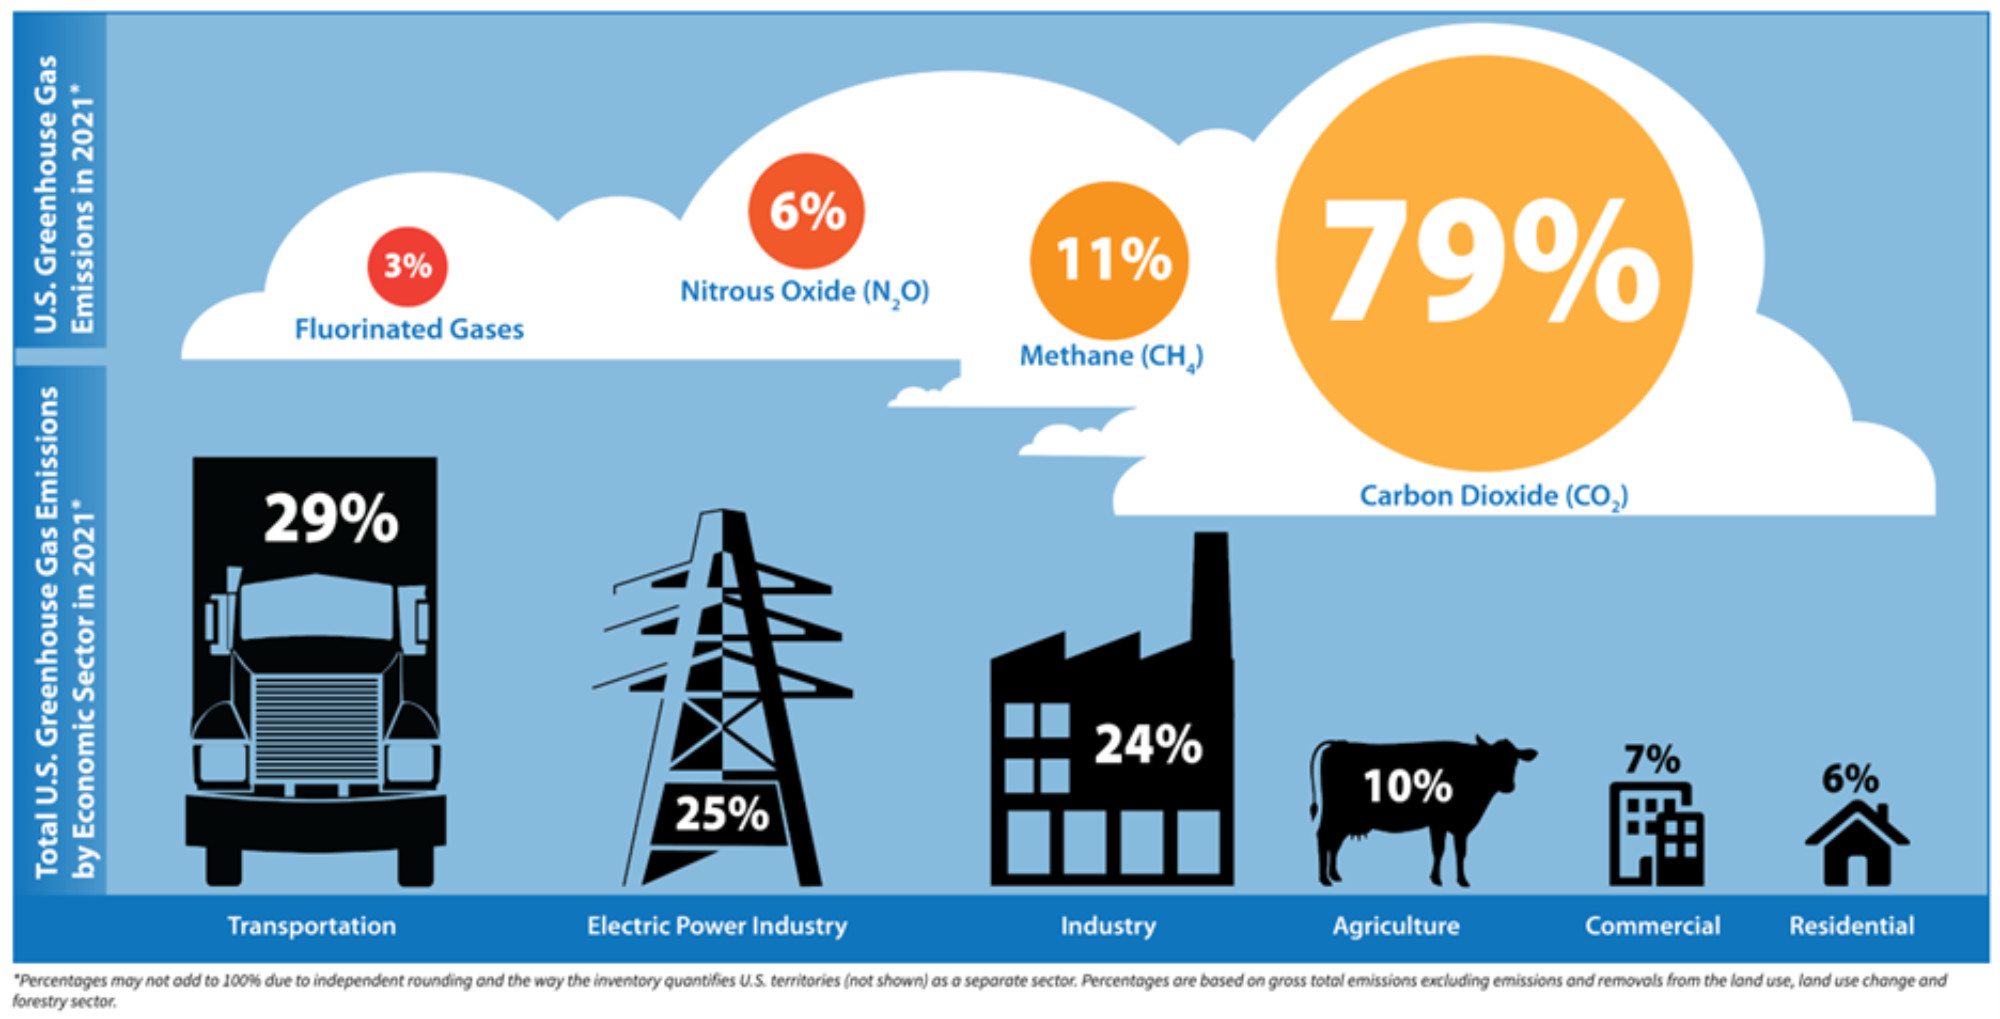 A diagram showing the percentage of different greenhouse gases in the atmosphere, represented in clouds, and pictures representing different sectors of the economy: a truck for transportation, an electrical tower for electricity generation, a factory for industry, a cow for agriculture, and buildings for residential and commercial buildings.